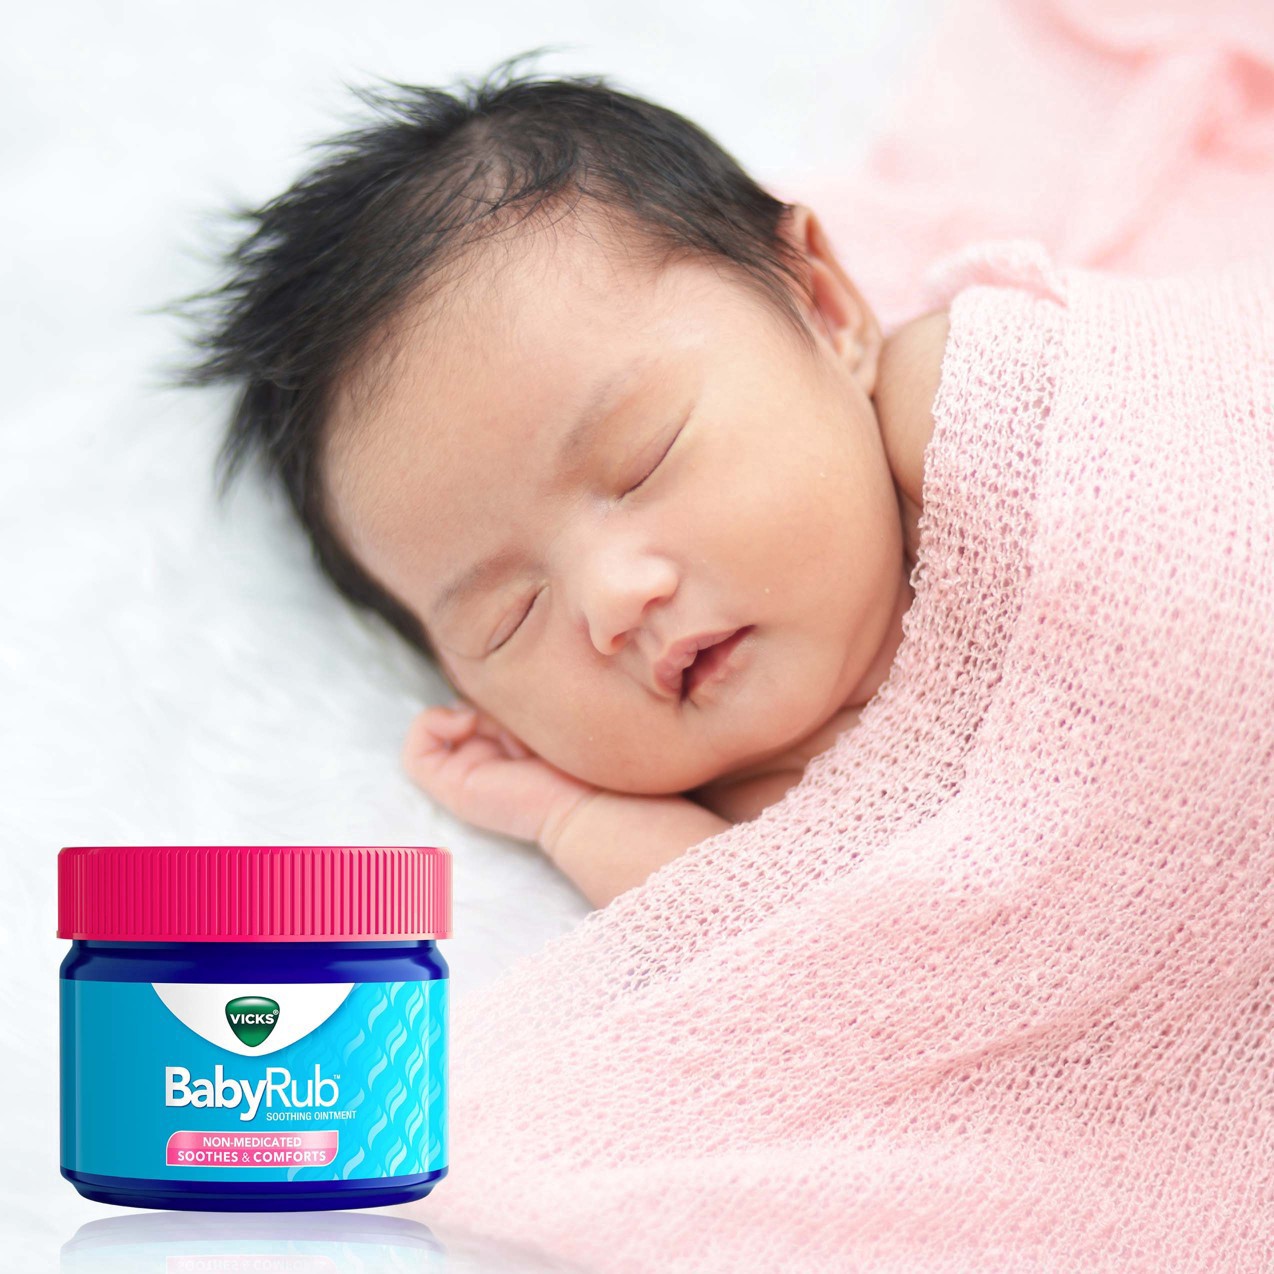 slide 61 of 78, Vicks BabyRub, Chest Rub Ointment with Soothing Aloe, Eucalyptus, Lavender, and Rosemary, from The Makers of VapoRub, 1.76 oz, 1.76 oz